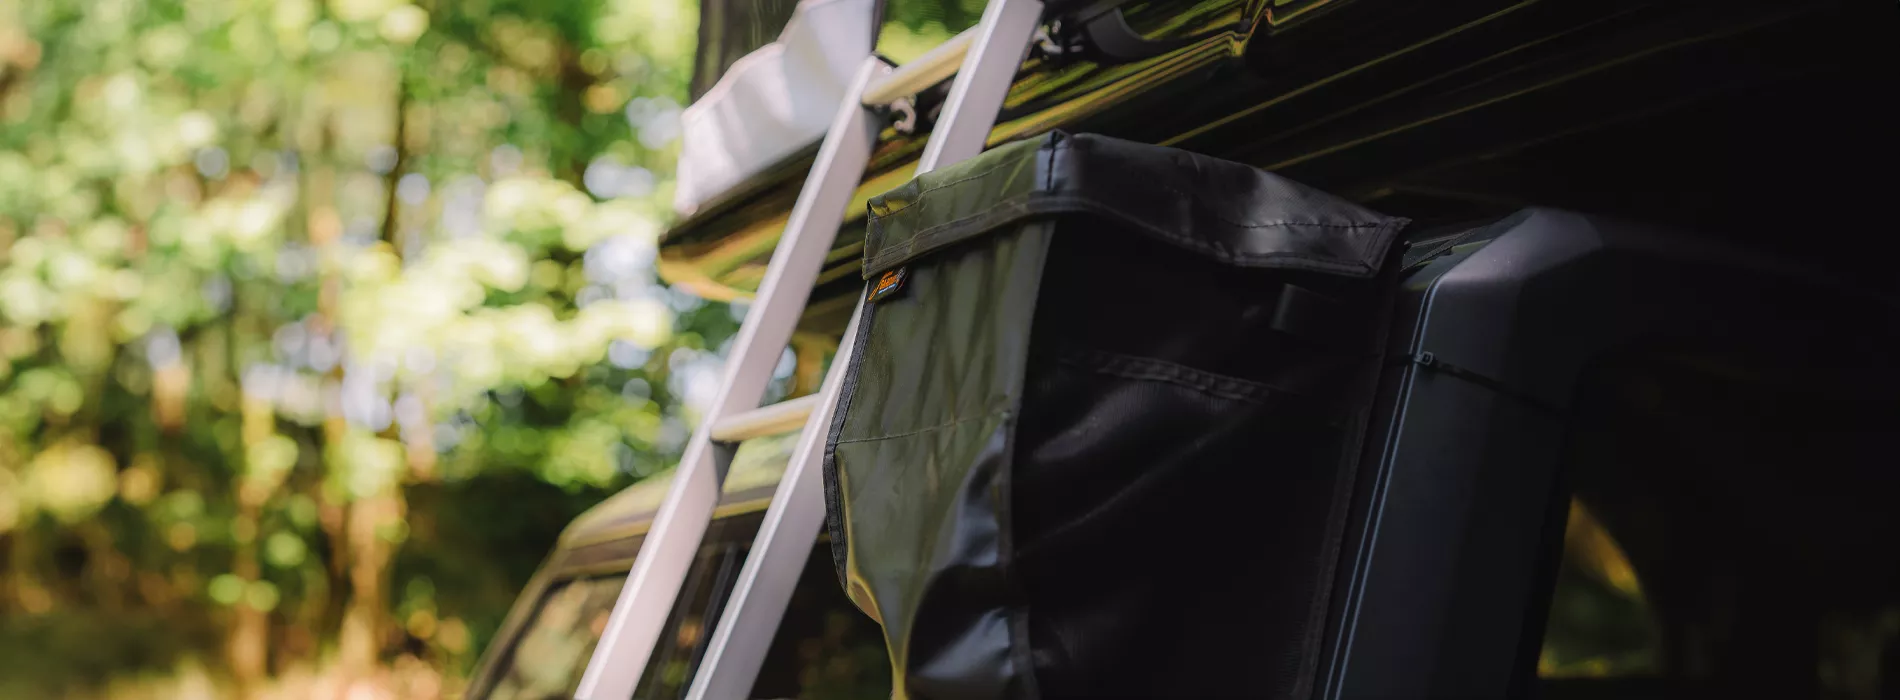 James Baroud Adventure Bag attached next to the Rooftop Tent ladder